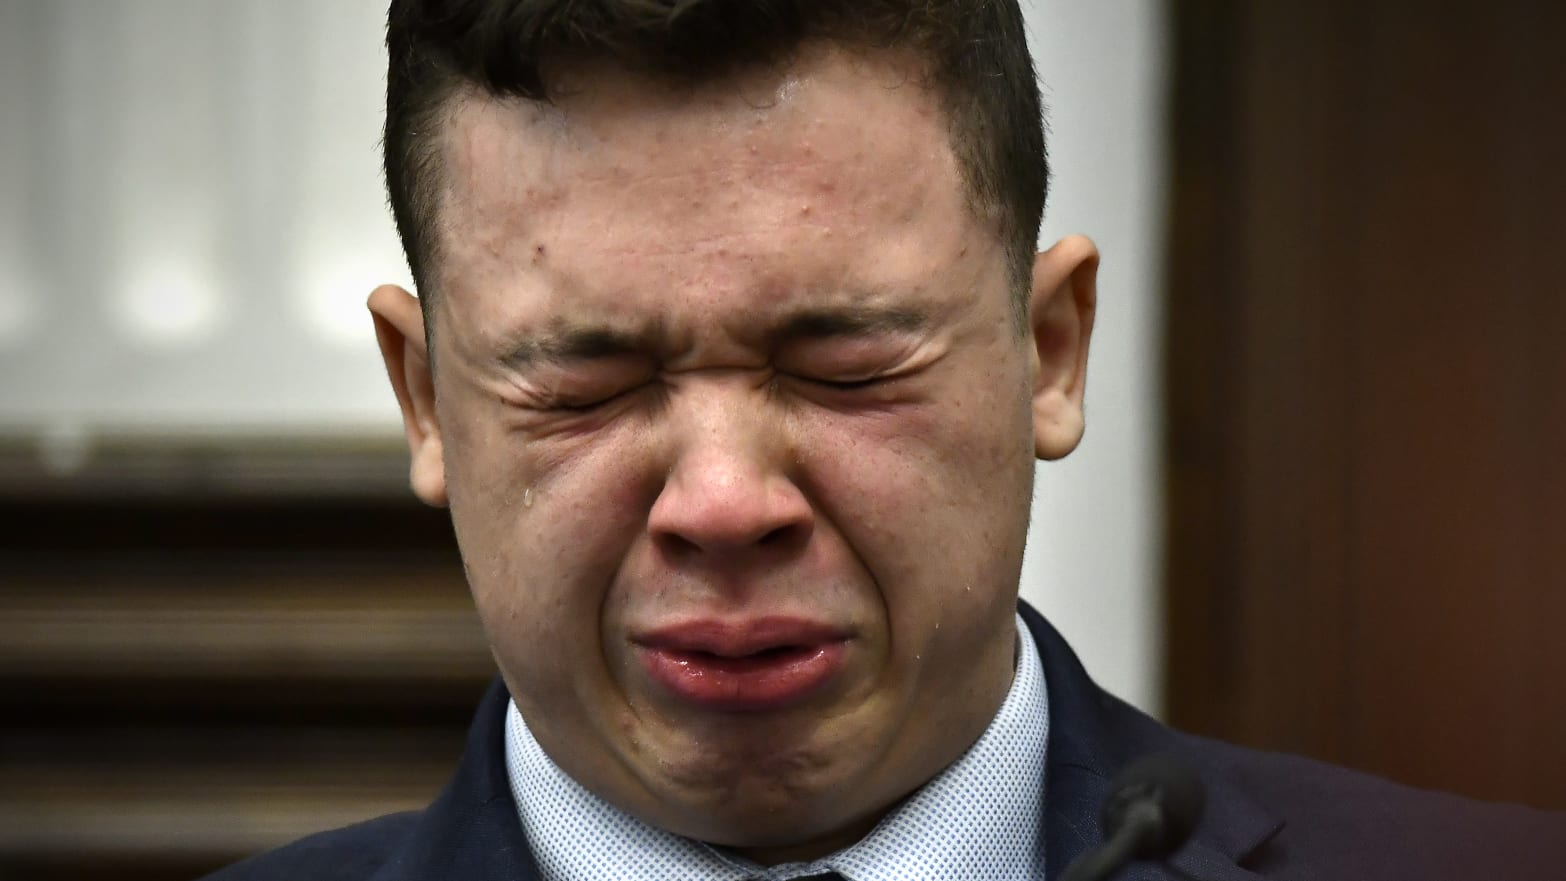  Kyle Rittenhouse breaks down on the stand as he testifies about his encounter with the late Joseph Rosenbaum during his trial at the Kenosha County Courthouse on November 10, 2021 in Kenosha, Wisconsin.